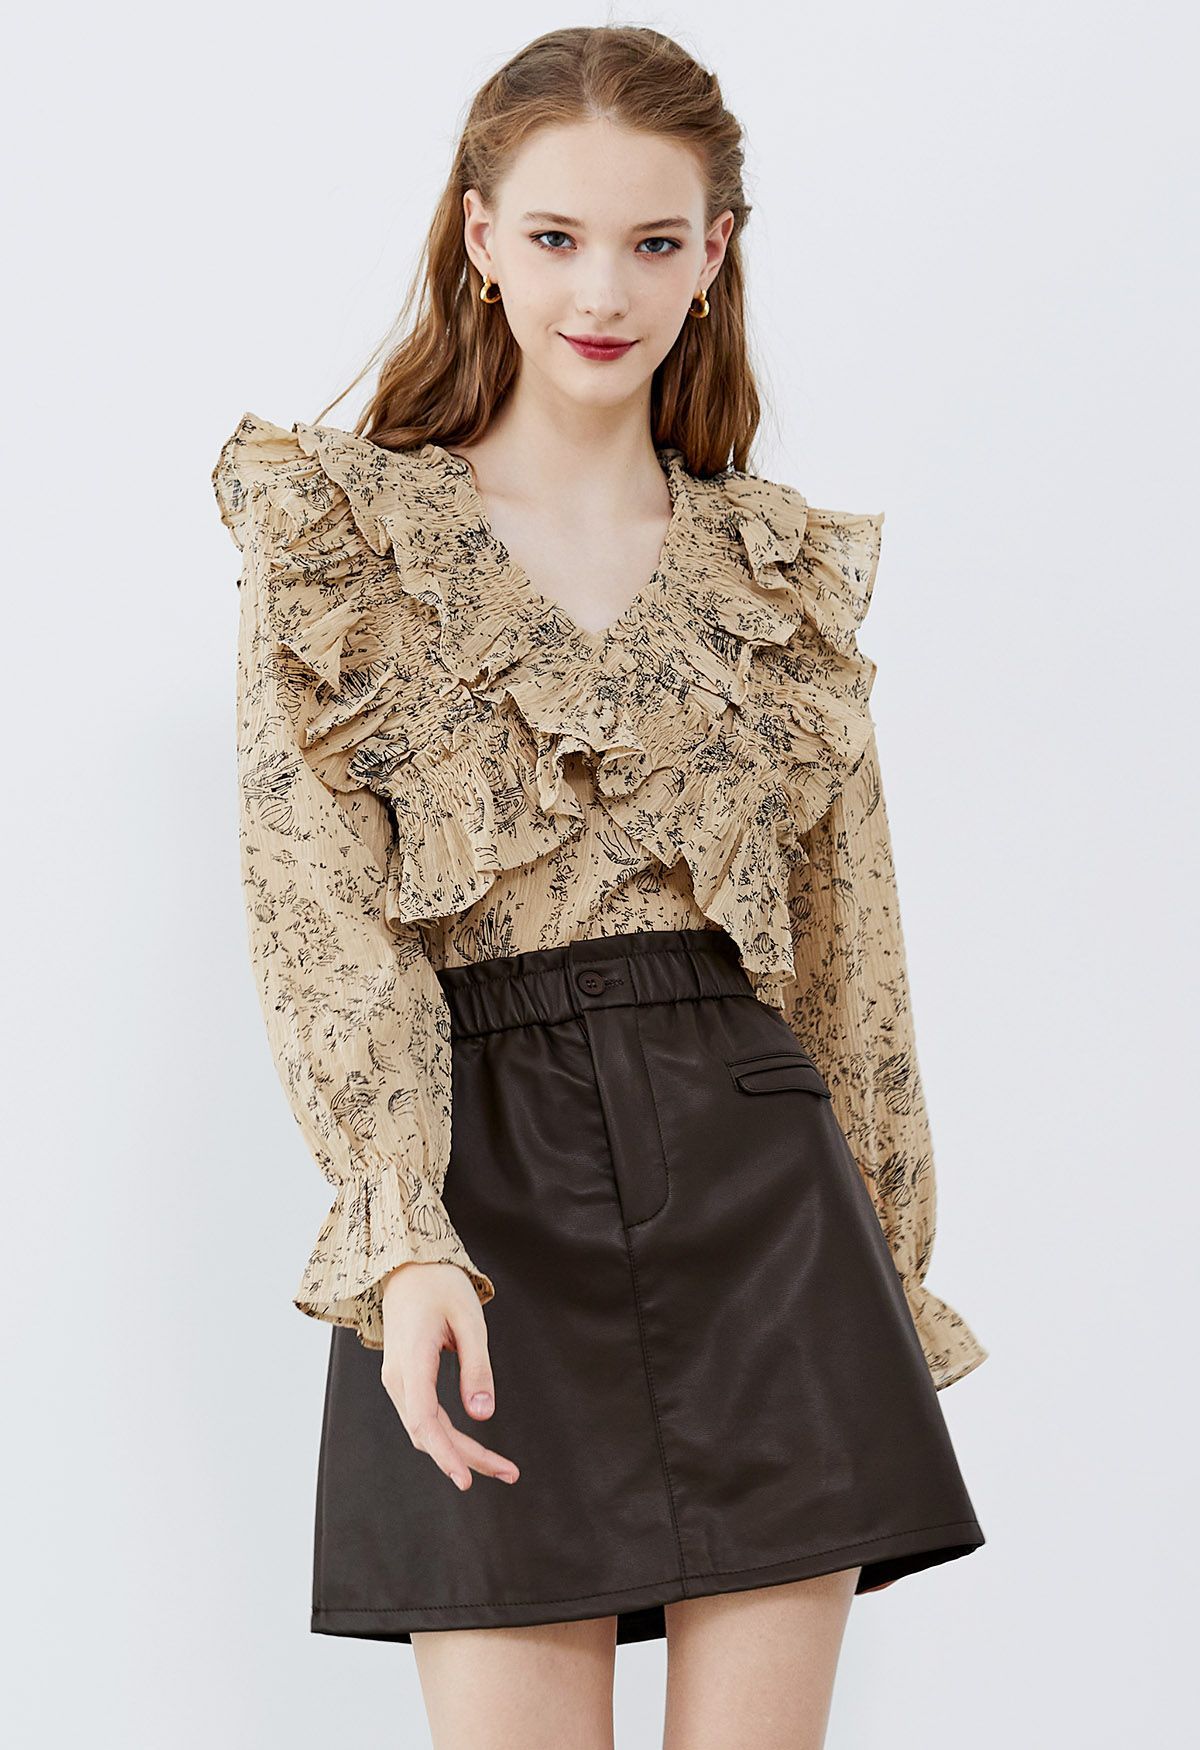 Abstract Print Cross Tiered Ruffled Top in Light Tan | Chicwish